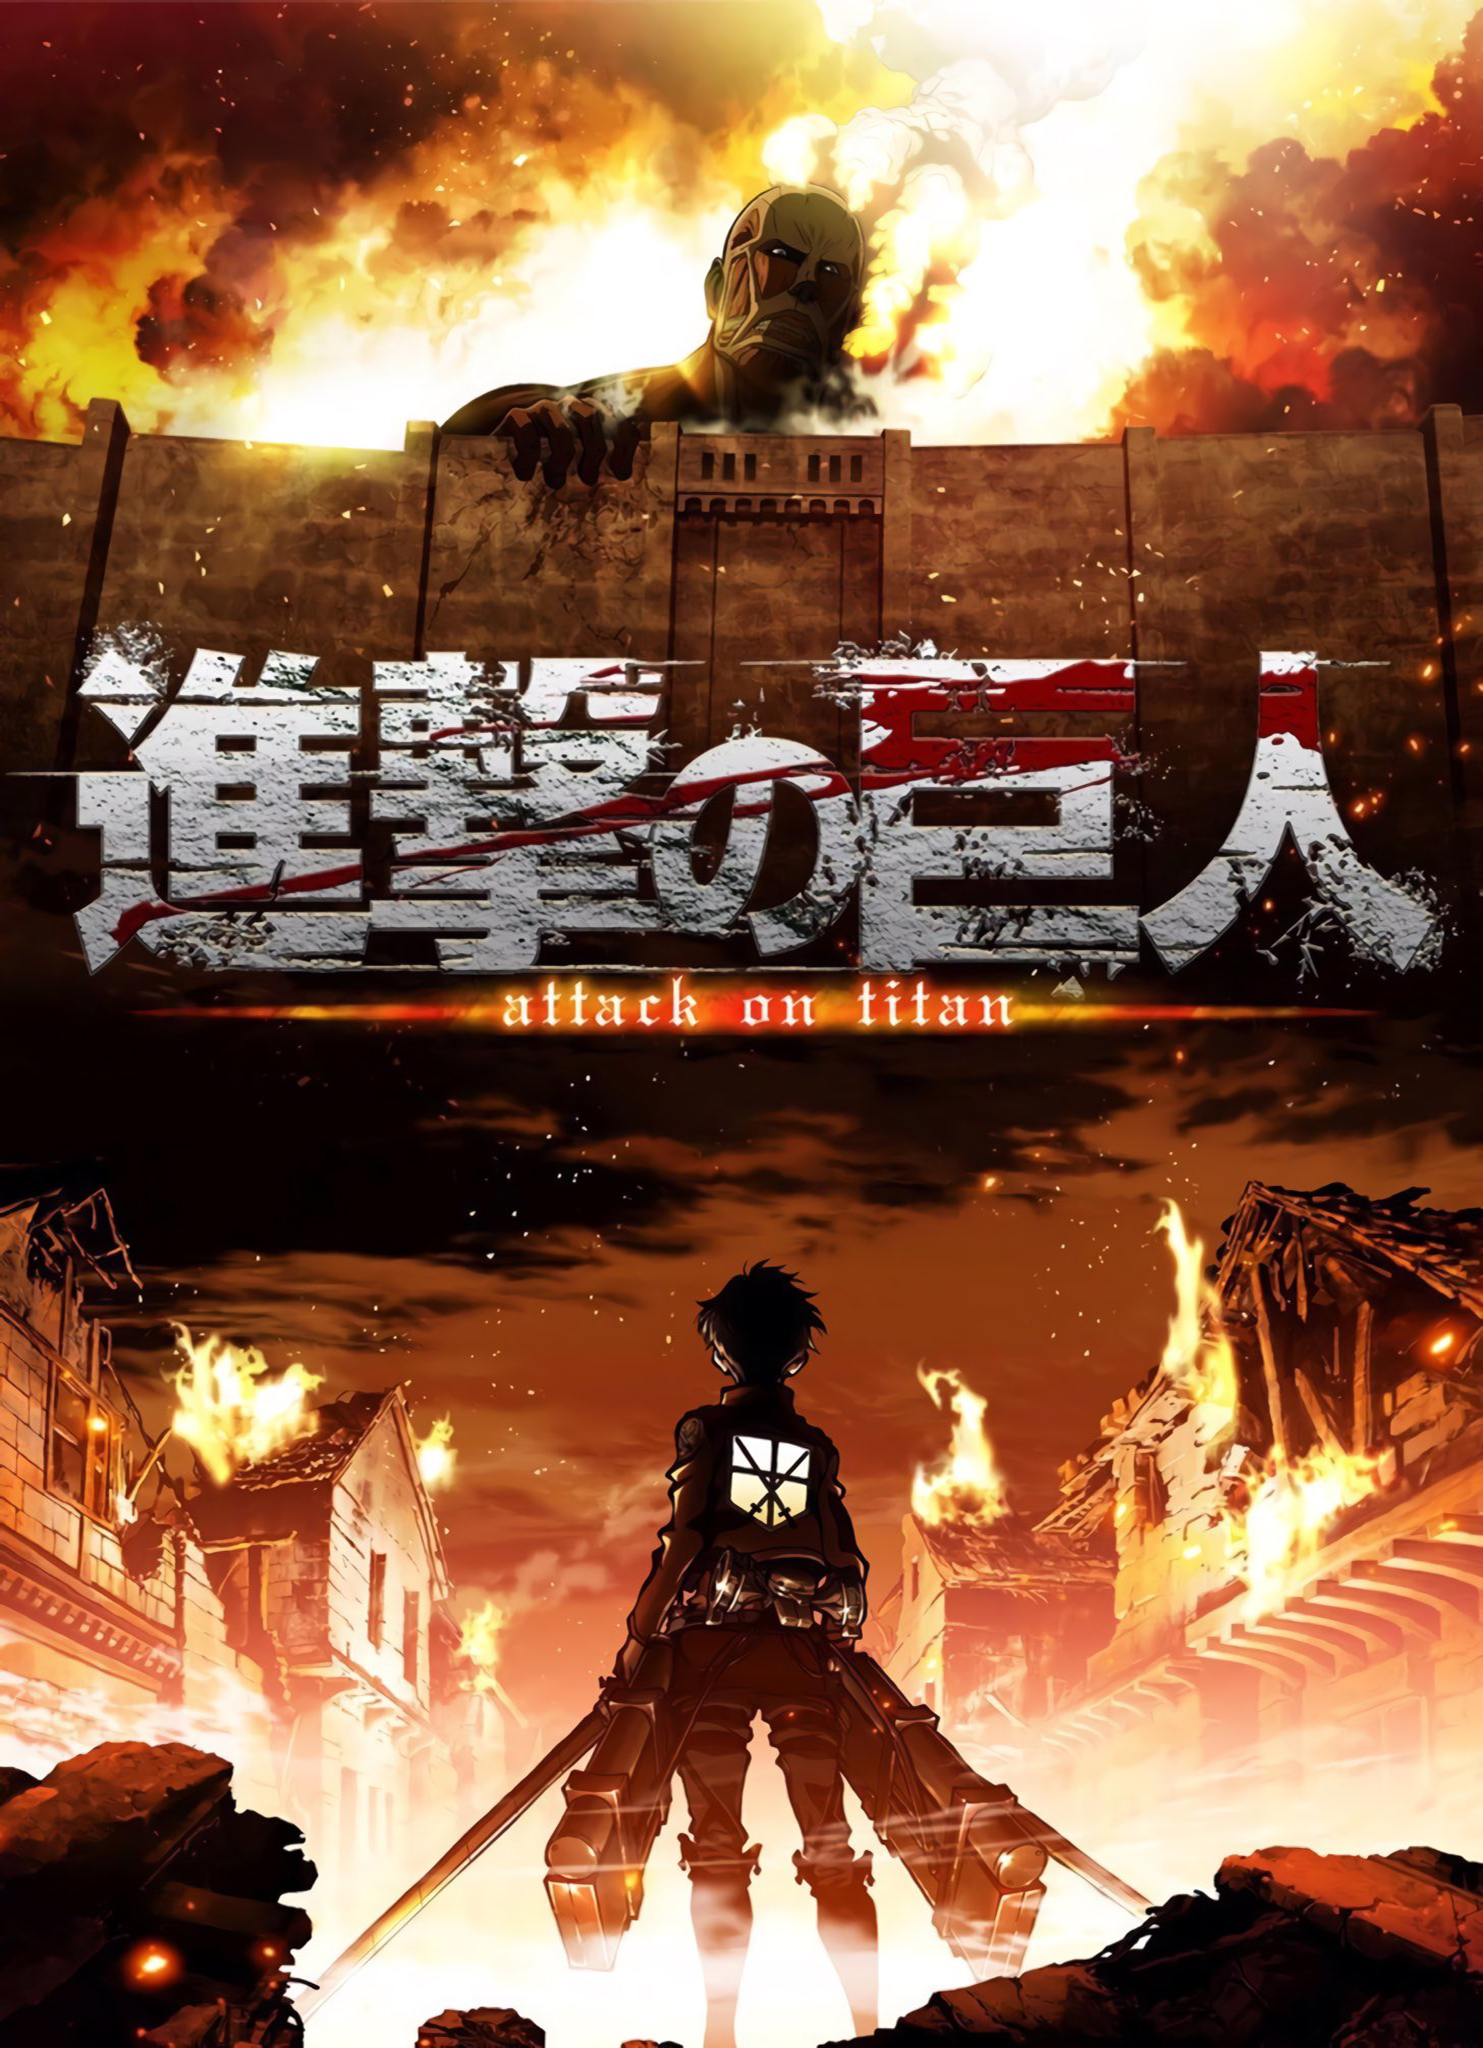 Attack on Titan Anime Original Ending  When Will The Anime Change    YouTube